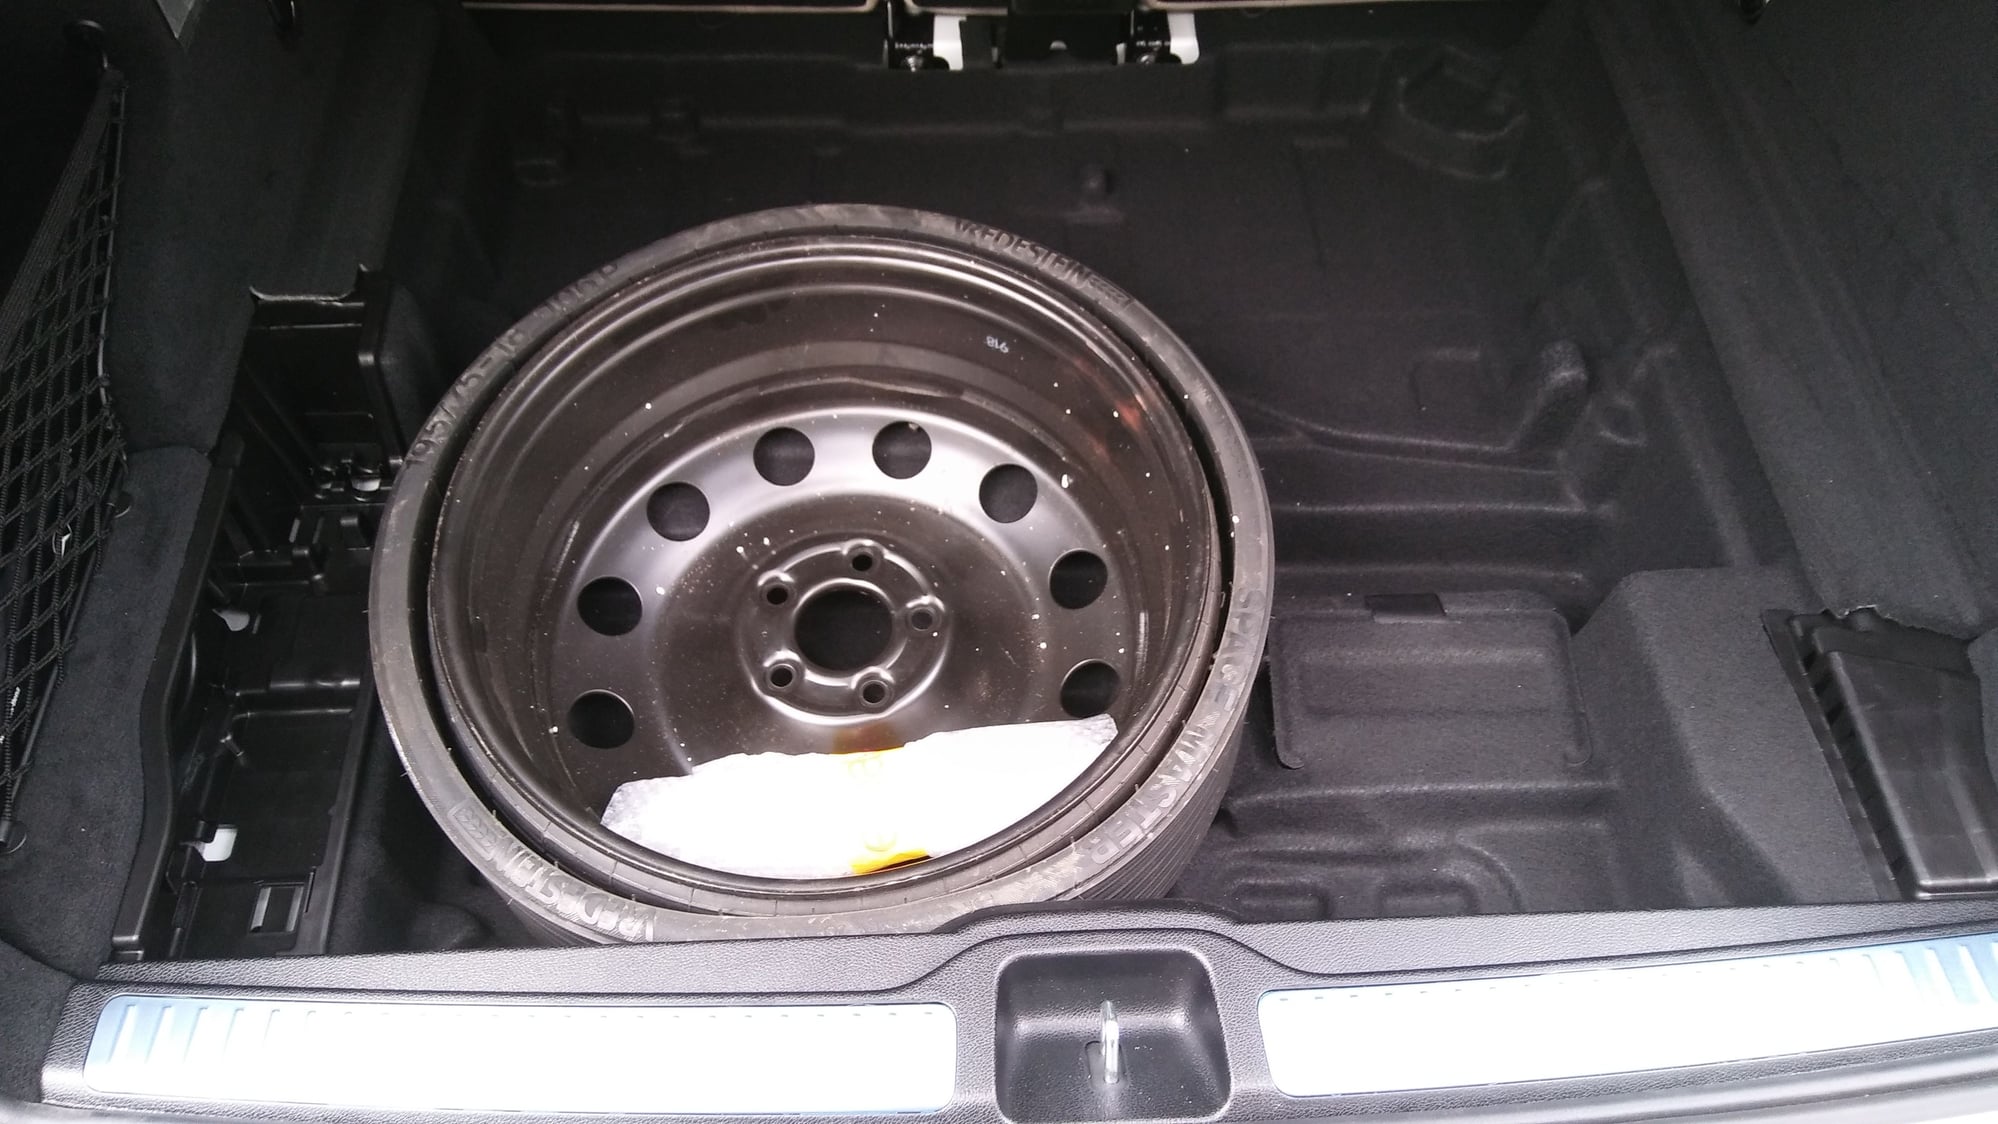 Spare Wheel/Tire Kit for sale - MBWorld.org Forums 2019 Mercedes Benz Glc 300 Spare Tire Kit